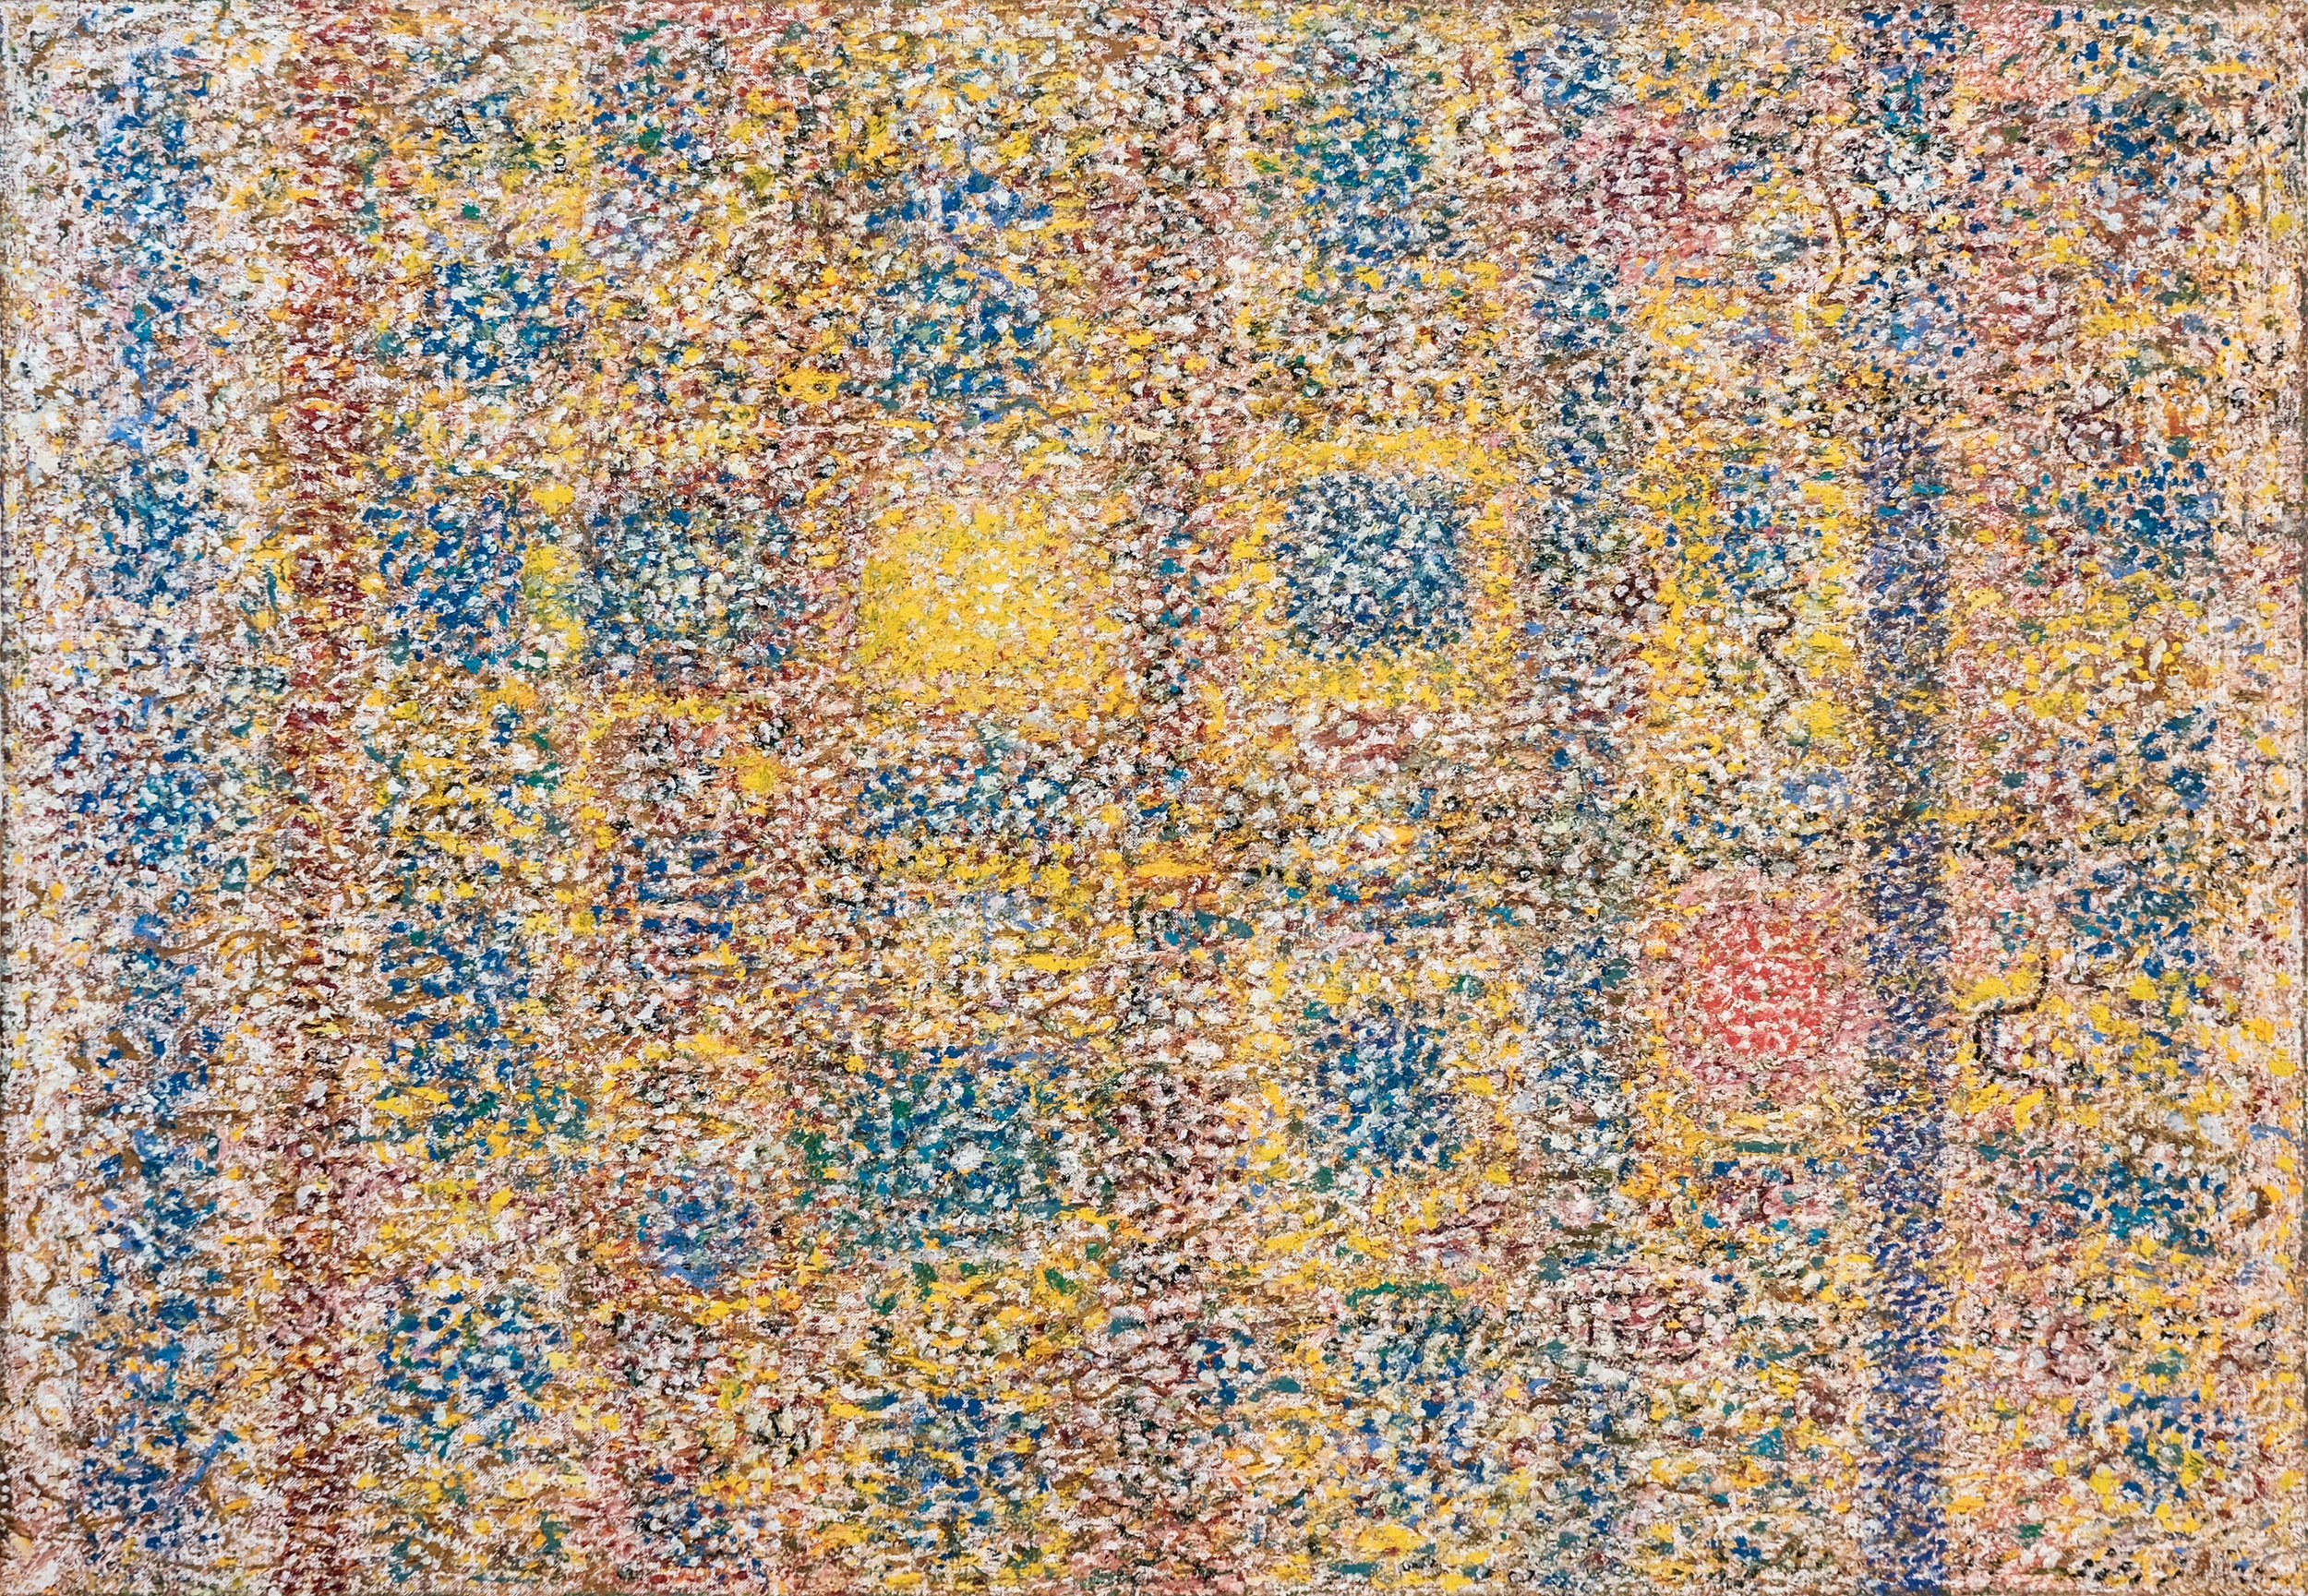  Richard Pousette-Dart  Untitled from Strata series , 1977 oil on canvas 50 x 72 inches (182.9 x 127 cm) 